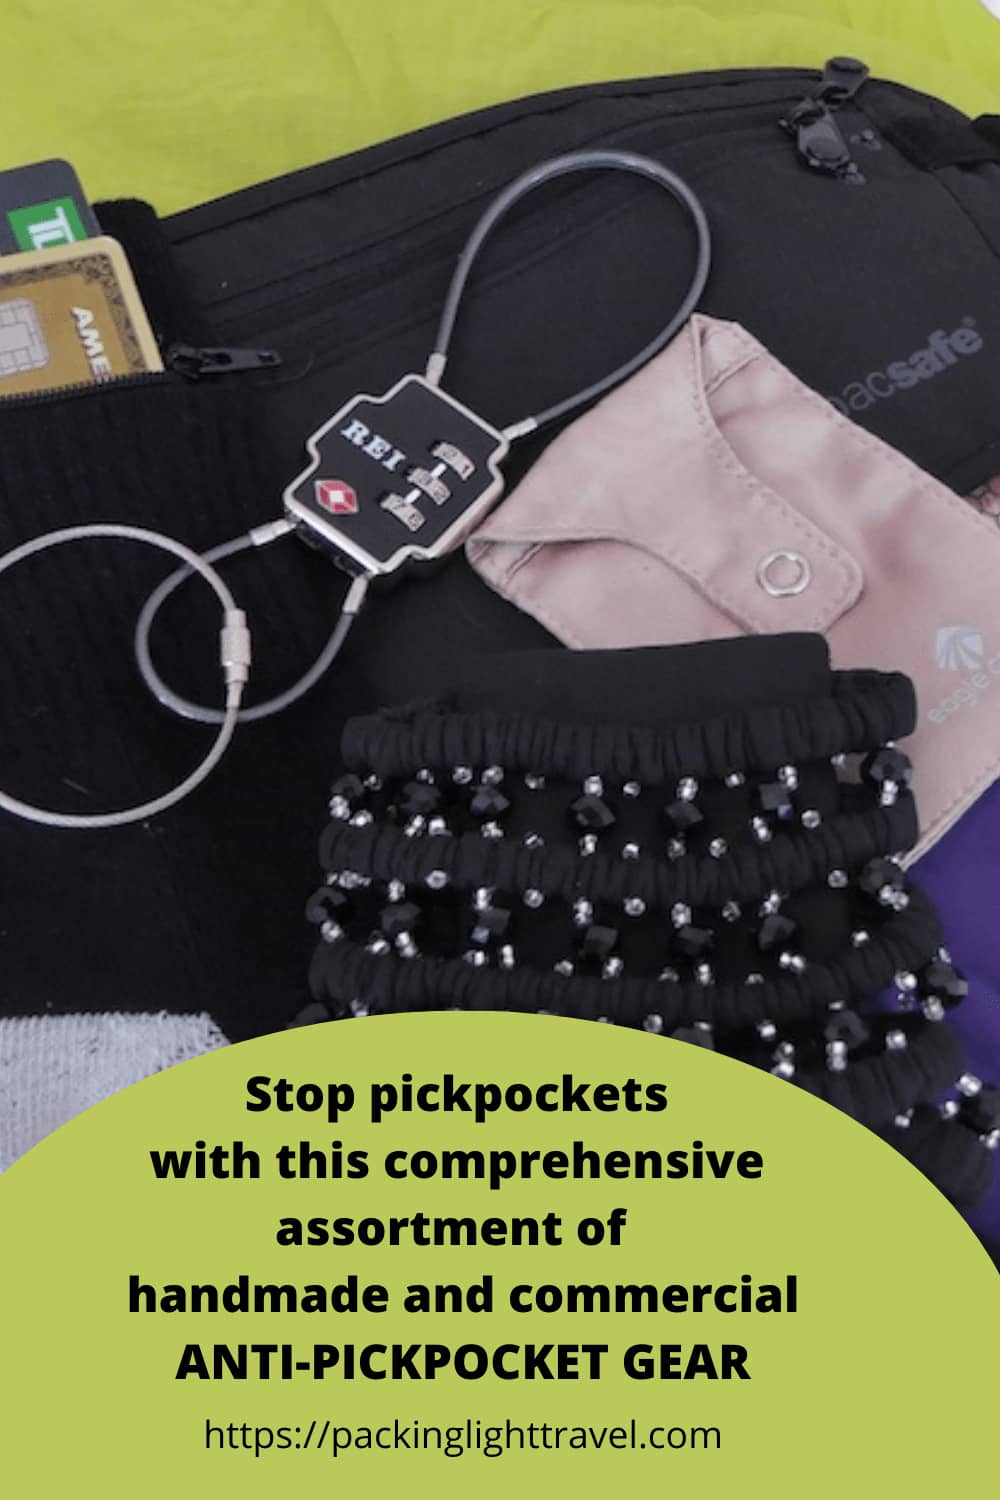 6 Tips To Keep Pickpockets From Stealing Your Purse or Wallet